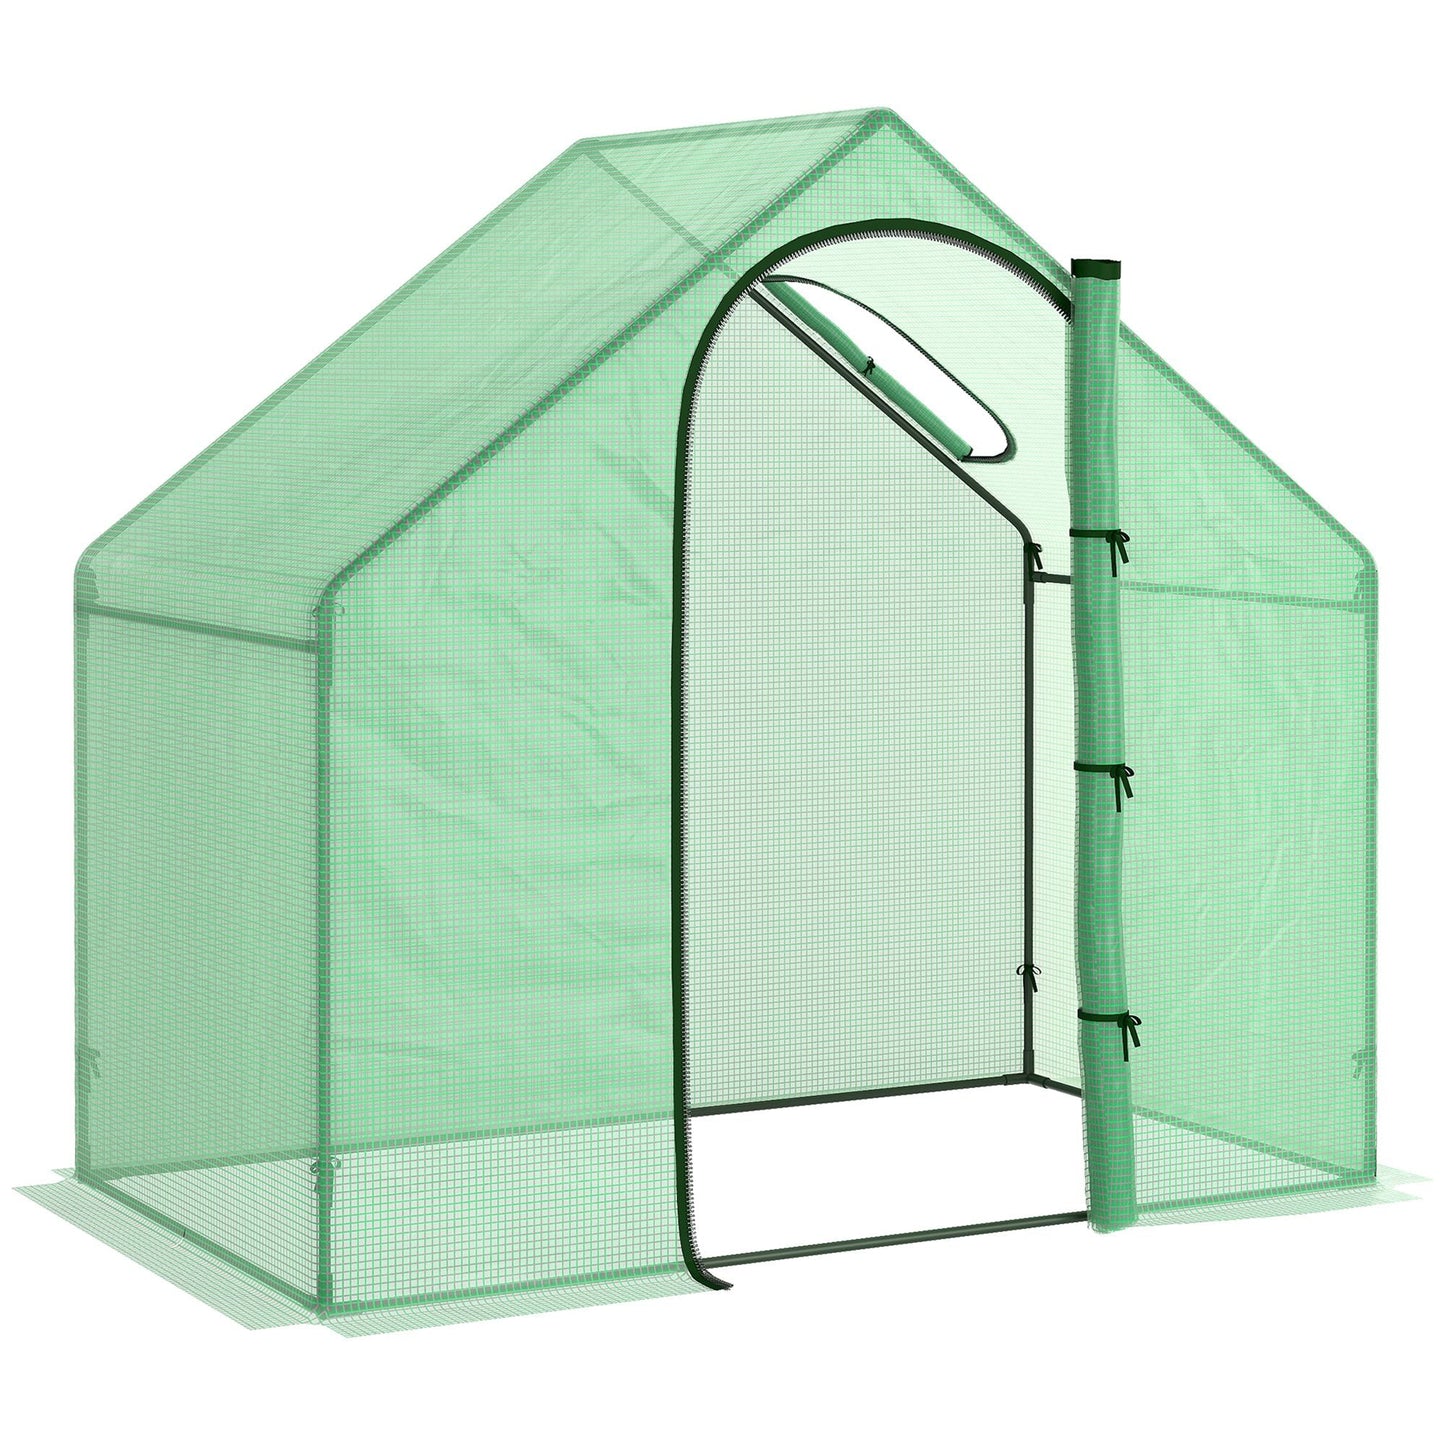 6 x 3.3 x 5.5ft Walk-in Garden Greenhouse with Door &; Top Window, Portable Mini Greenhouse for Plants Flowers Herbs Tomatoes, Outdoor Hot House Growing Tent with Steel Frame &; PE Cover at Gallery Canada